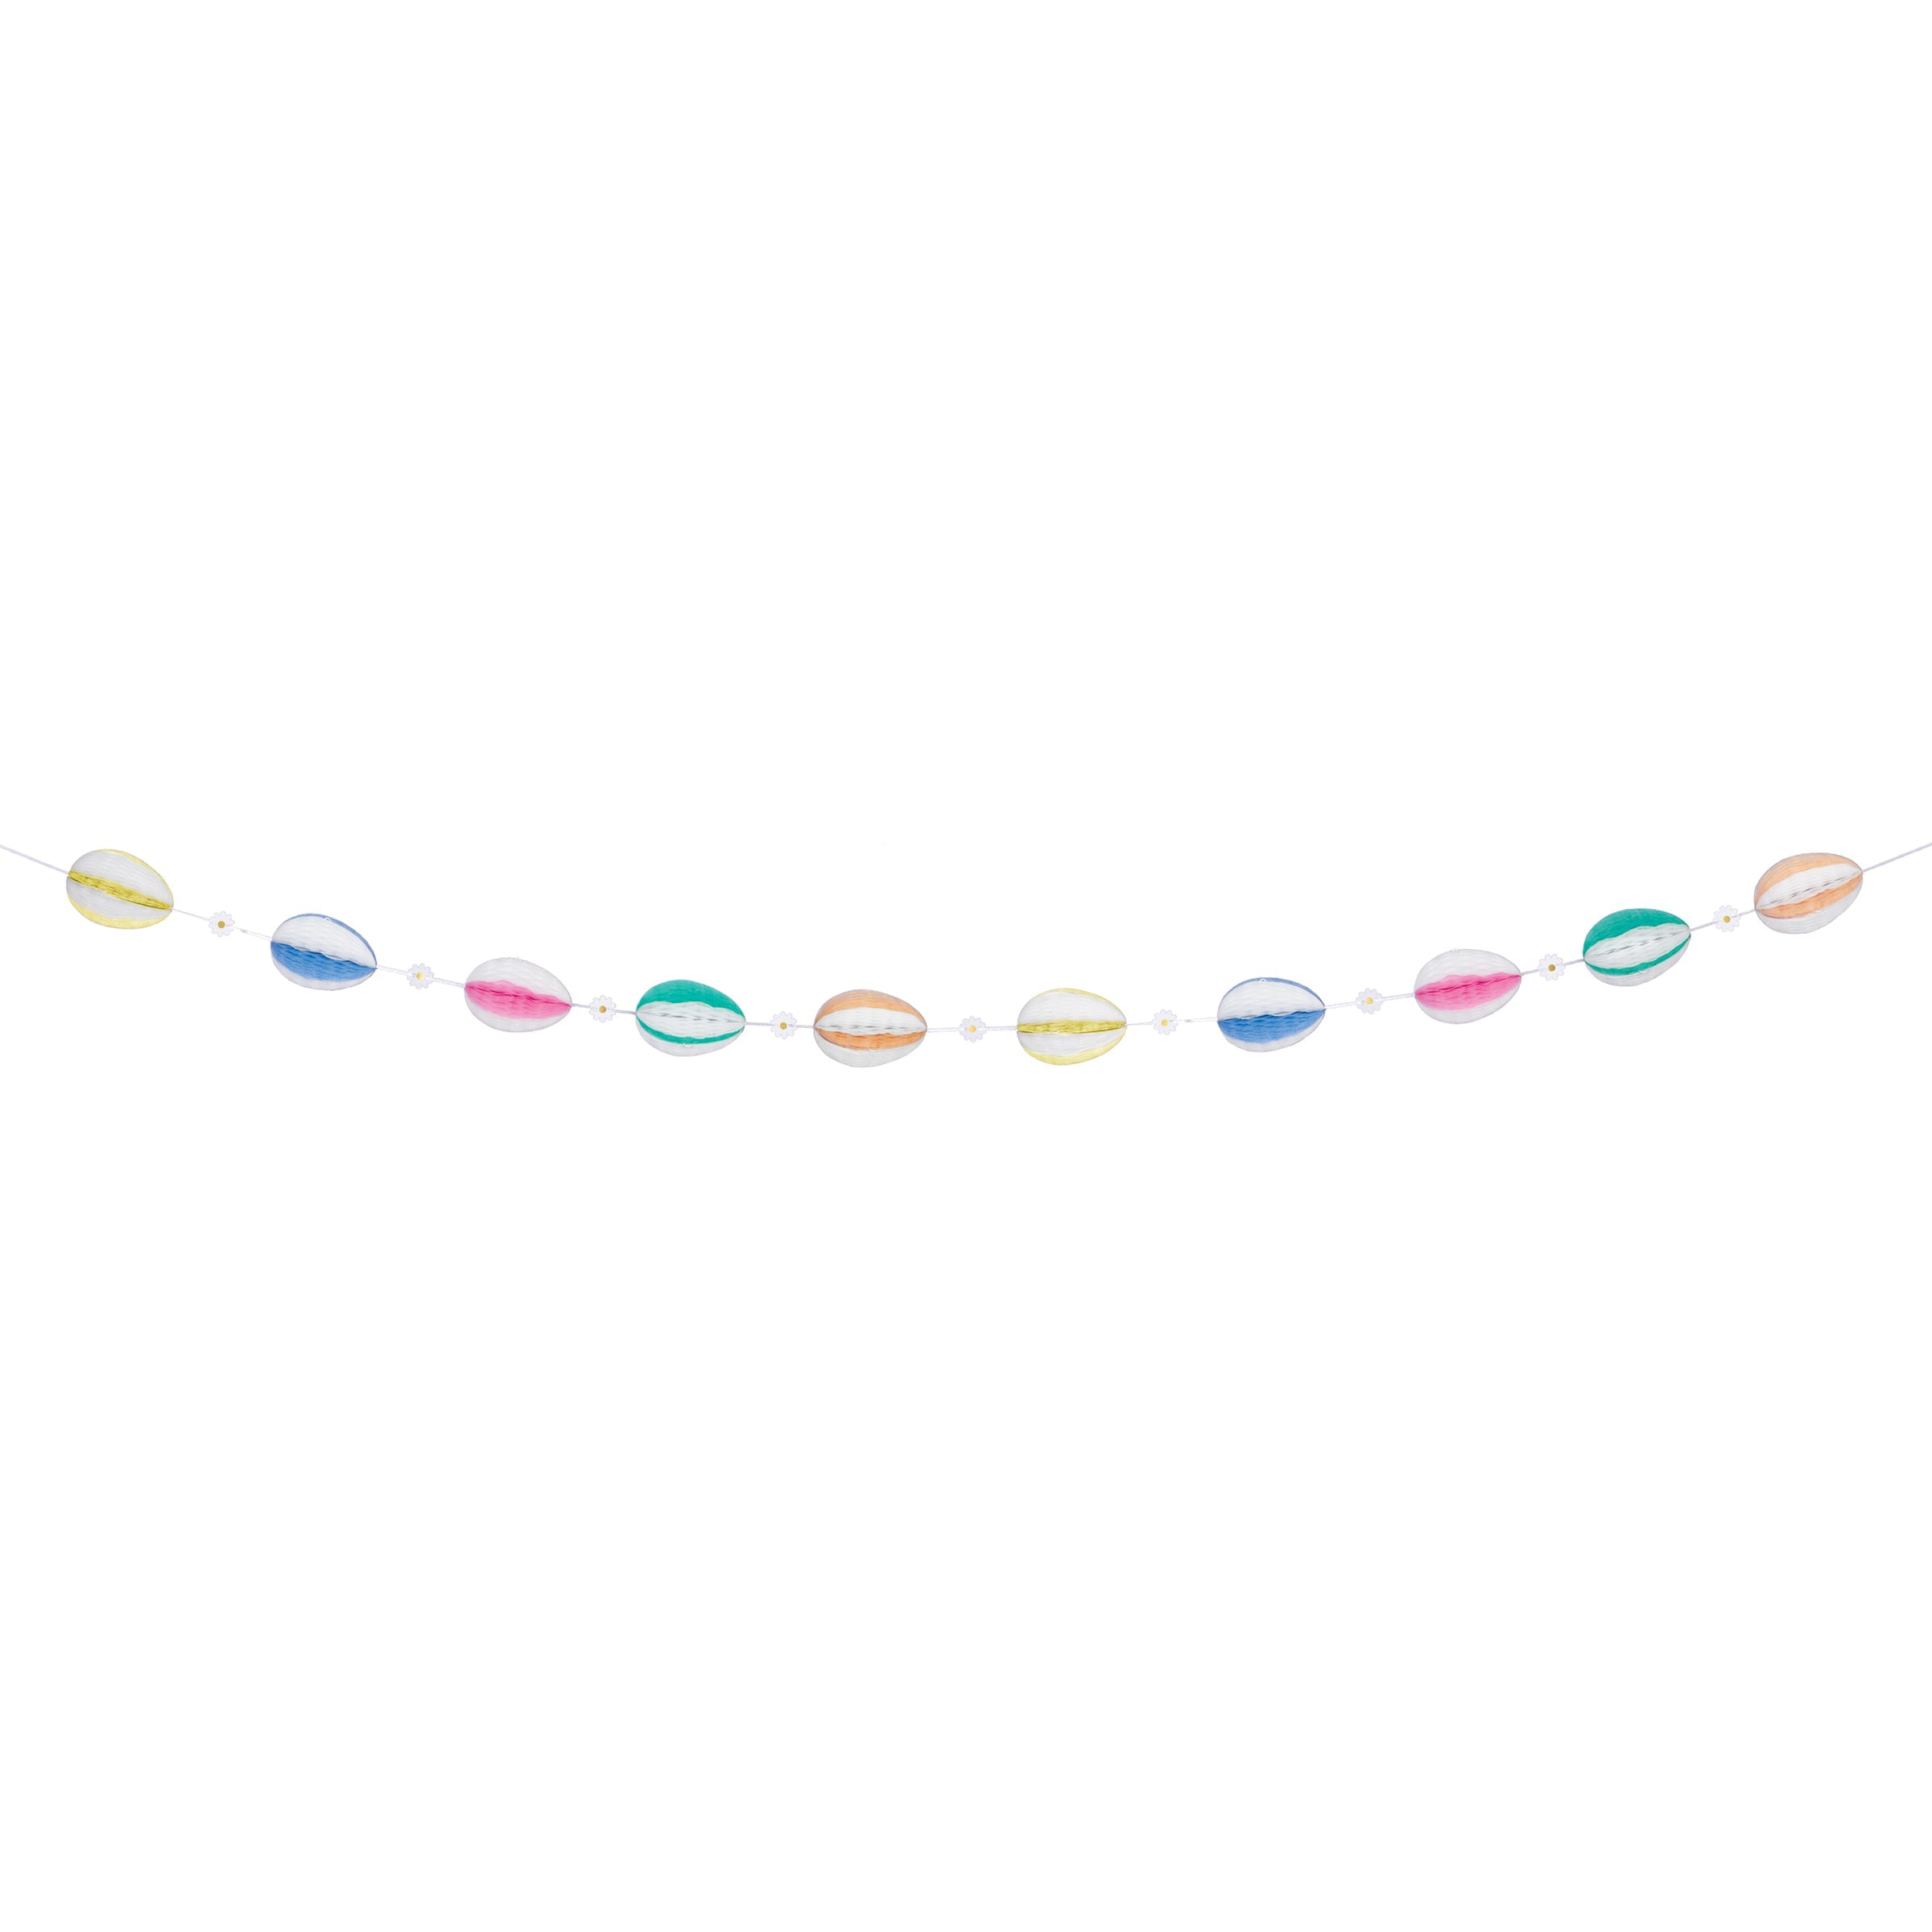 For a decorative Easter go no further than our honeycomb garland with striped Easter eggs and daisy decorations.